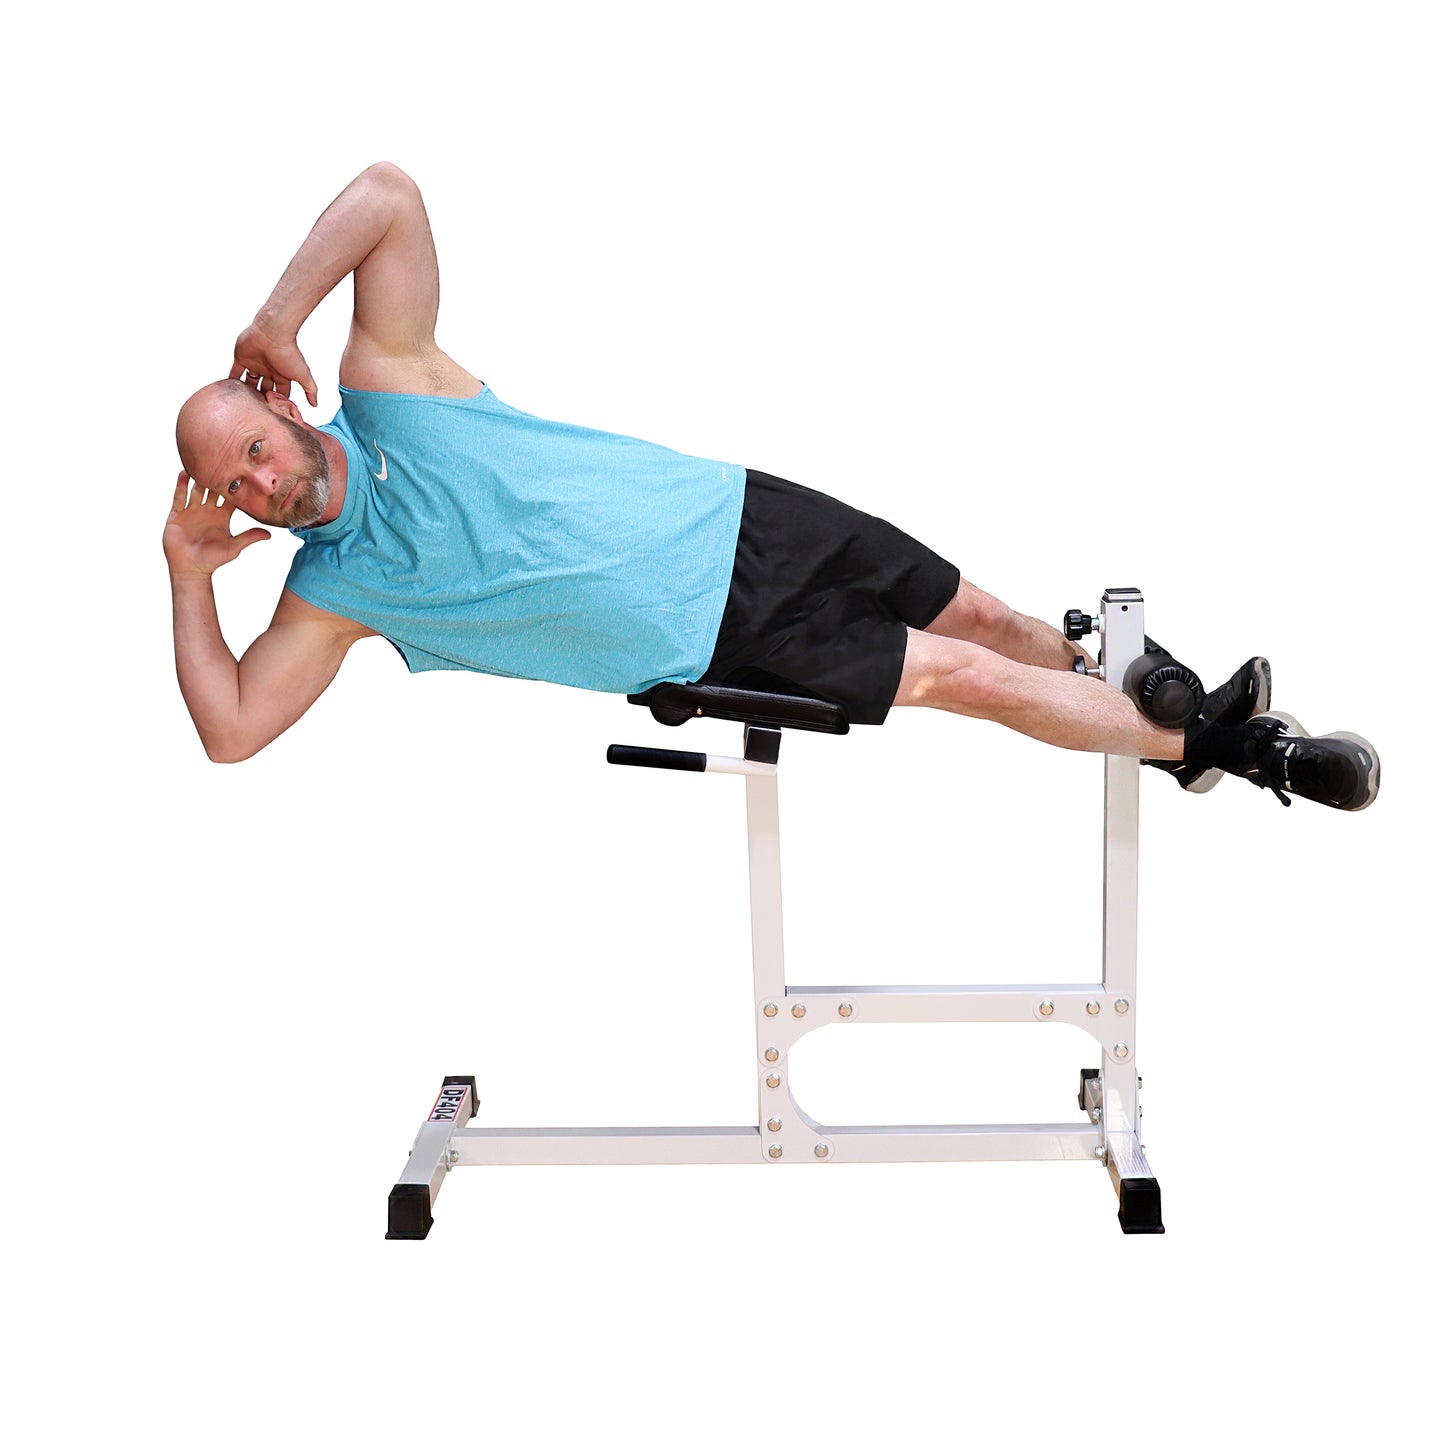 Deltech Fitness Hyperextension Bench